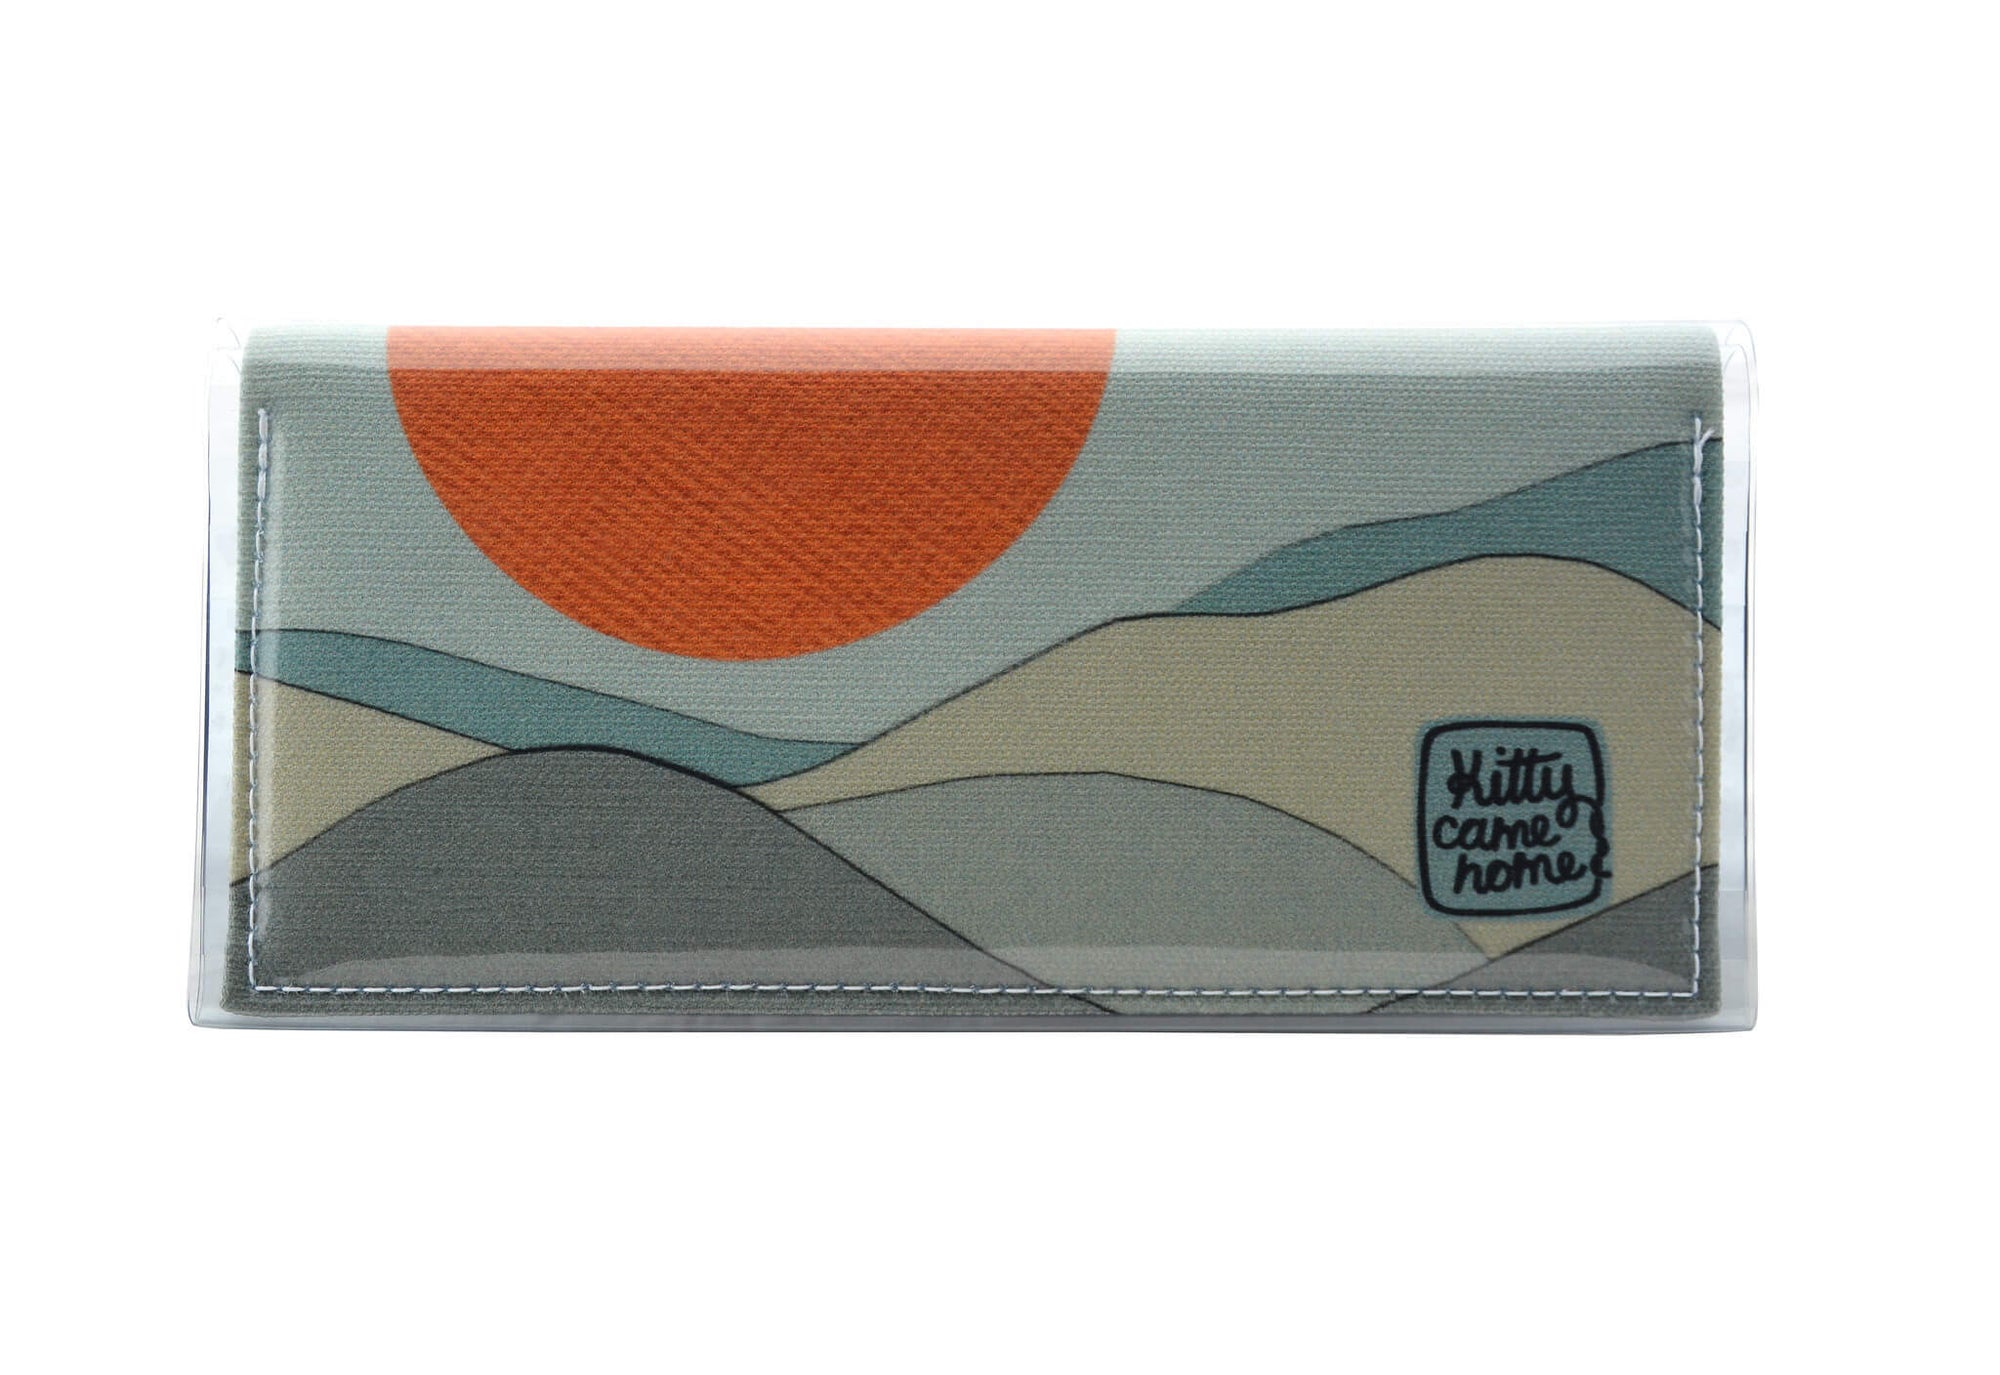 This is an image of the front of a Kitty Came Home bifold purse clutch in 'The night grows pale' design by Satin and Tat. An orange moon floats above a mist coloured landscape. This is the standard size.